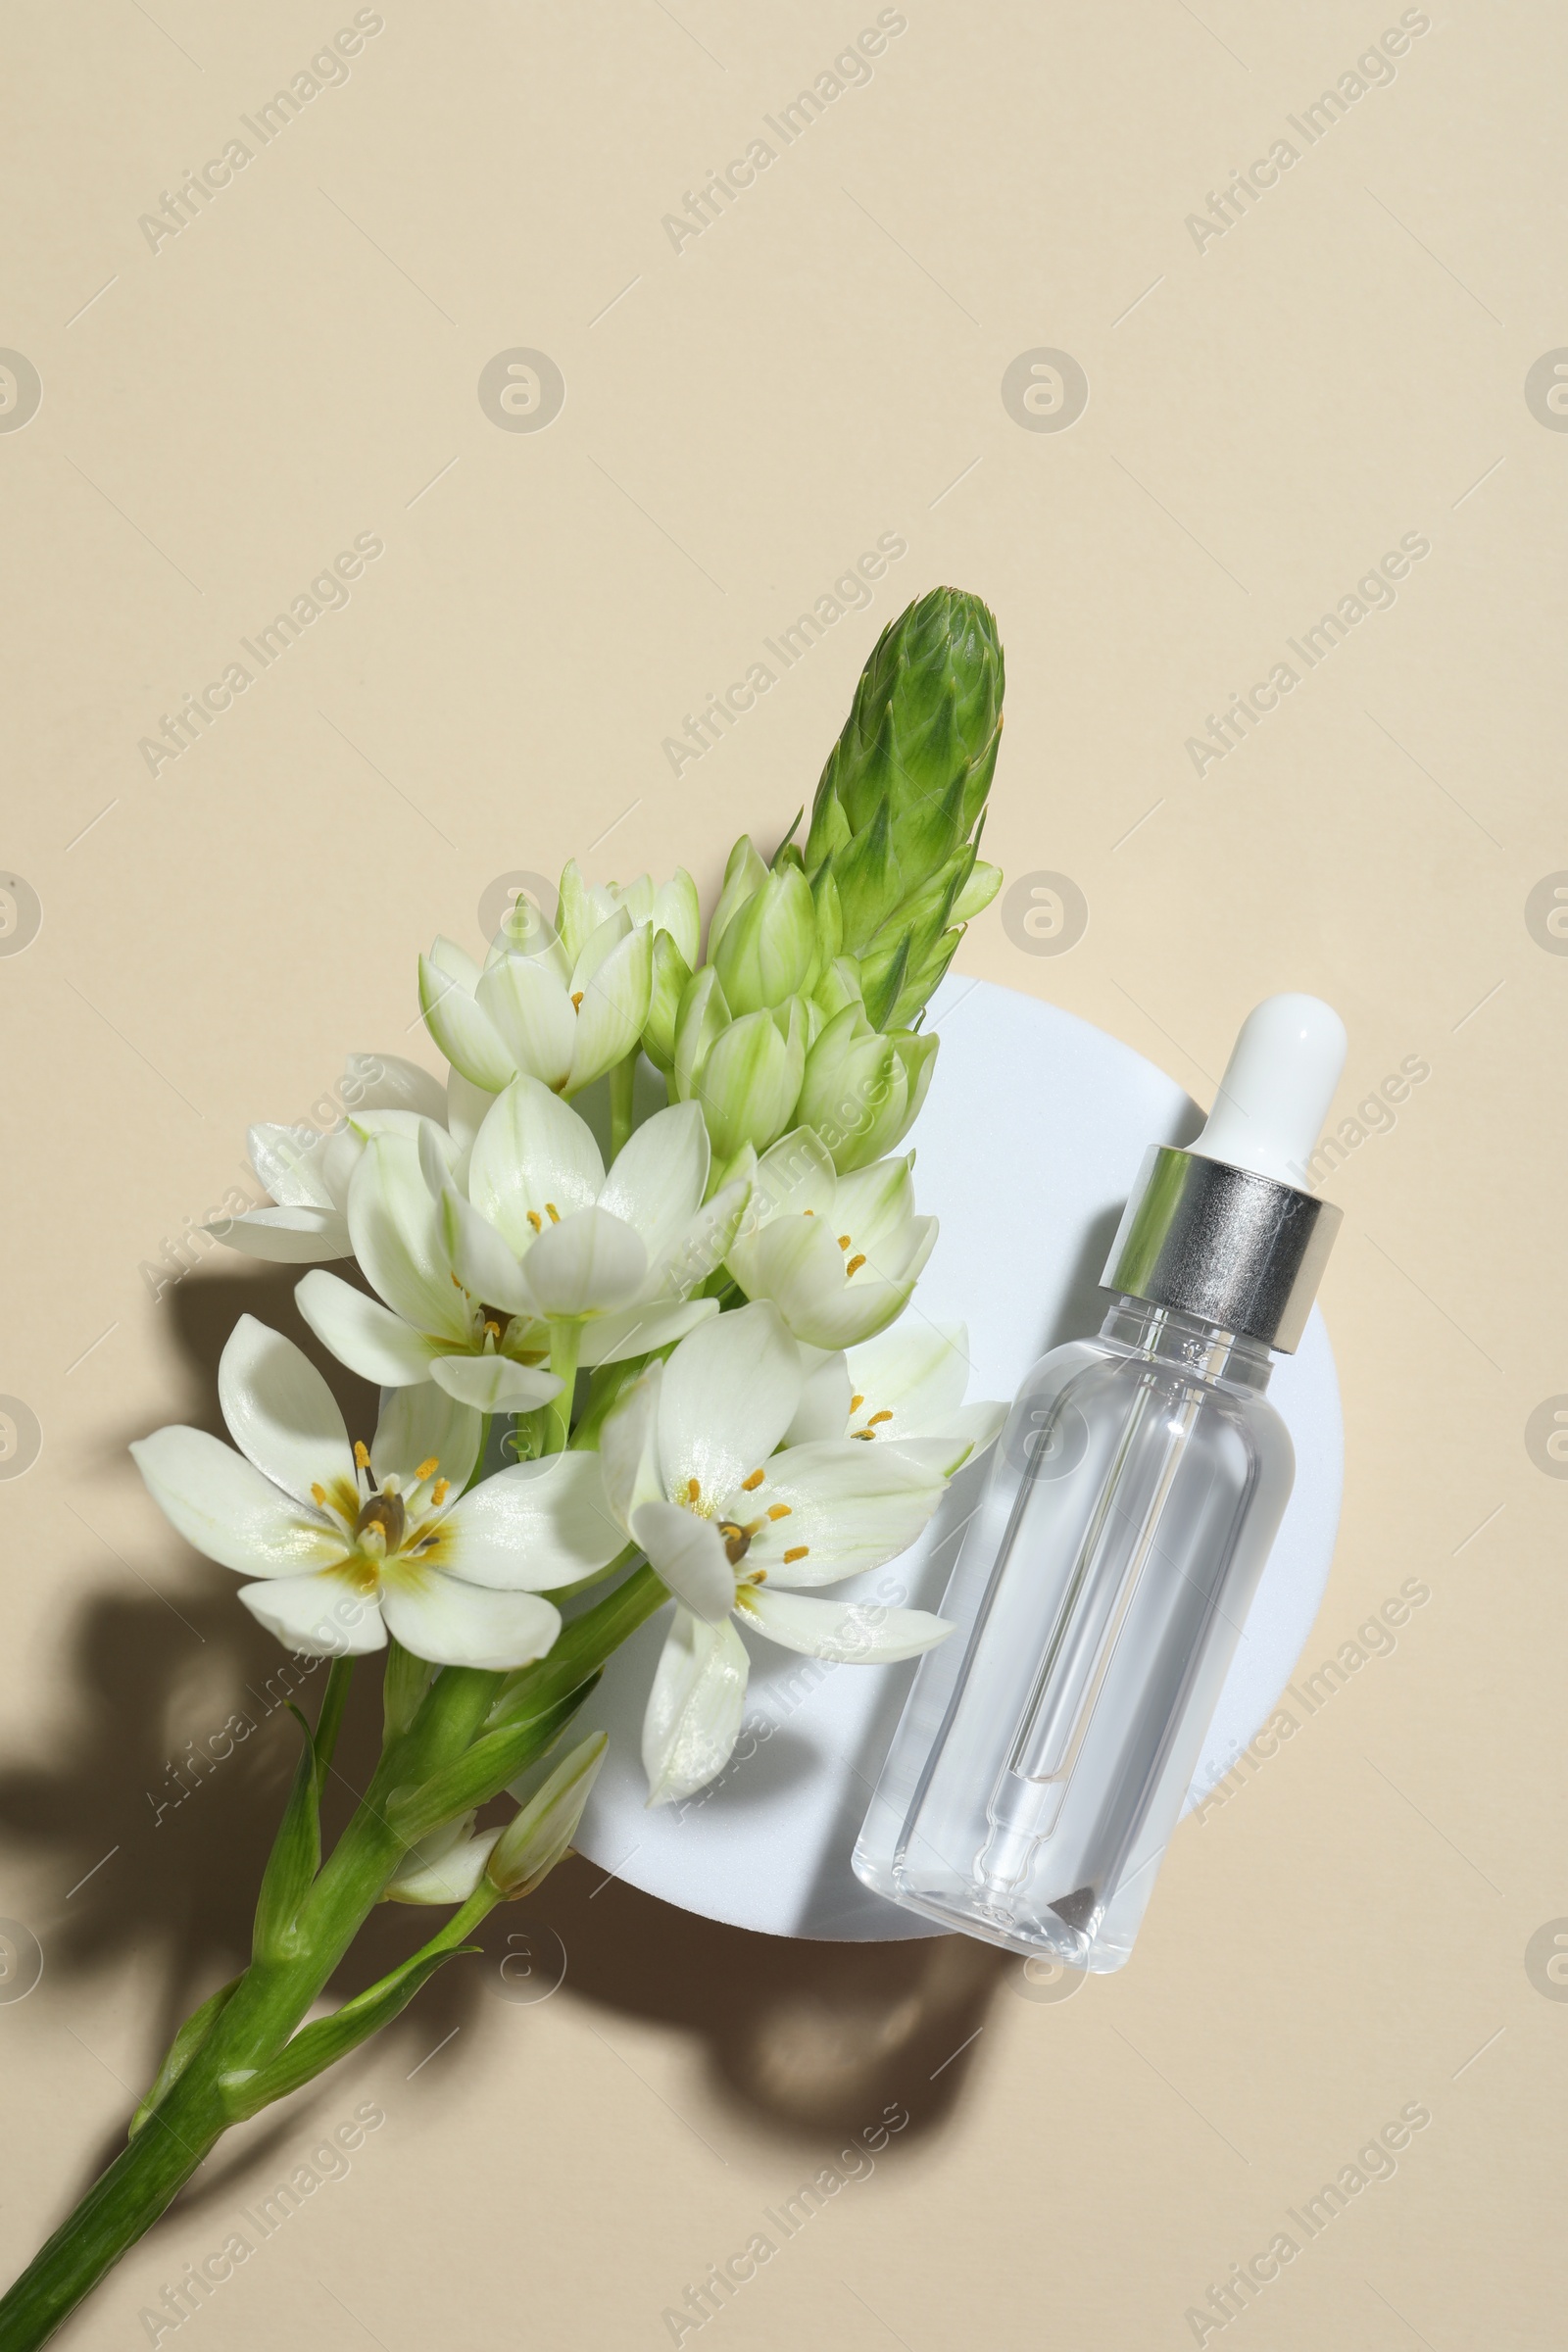 Photo of Bottle of cosmetic oil and flowers on beige background, top view